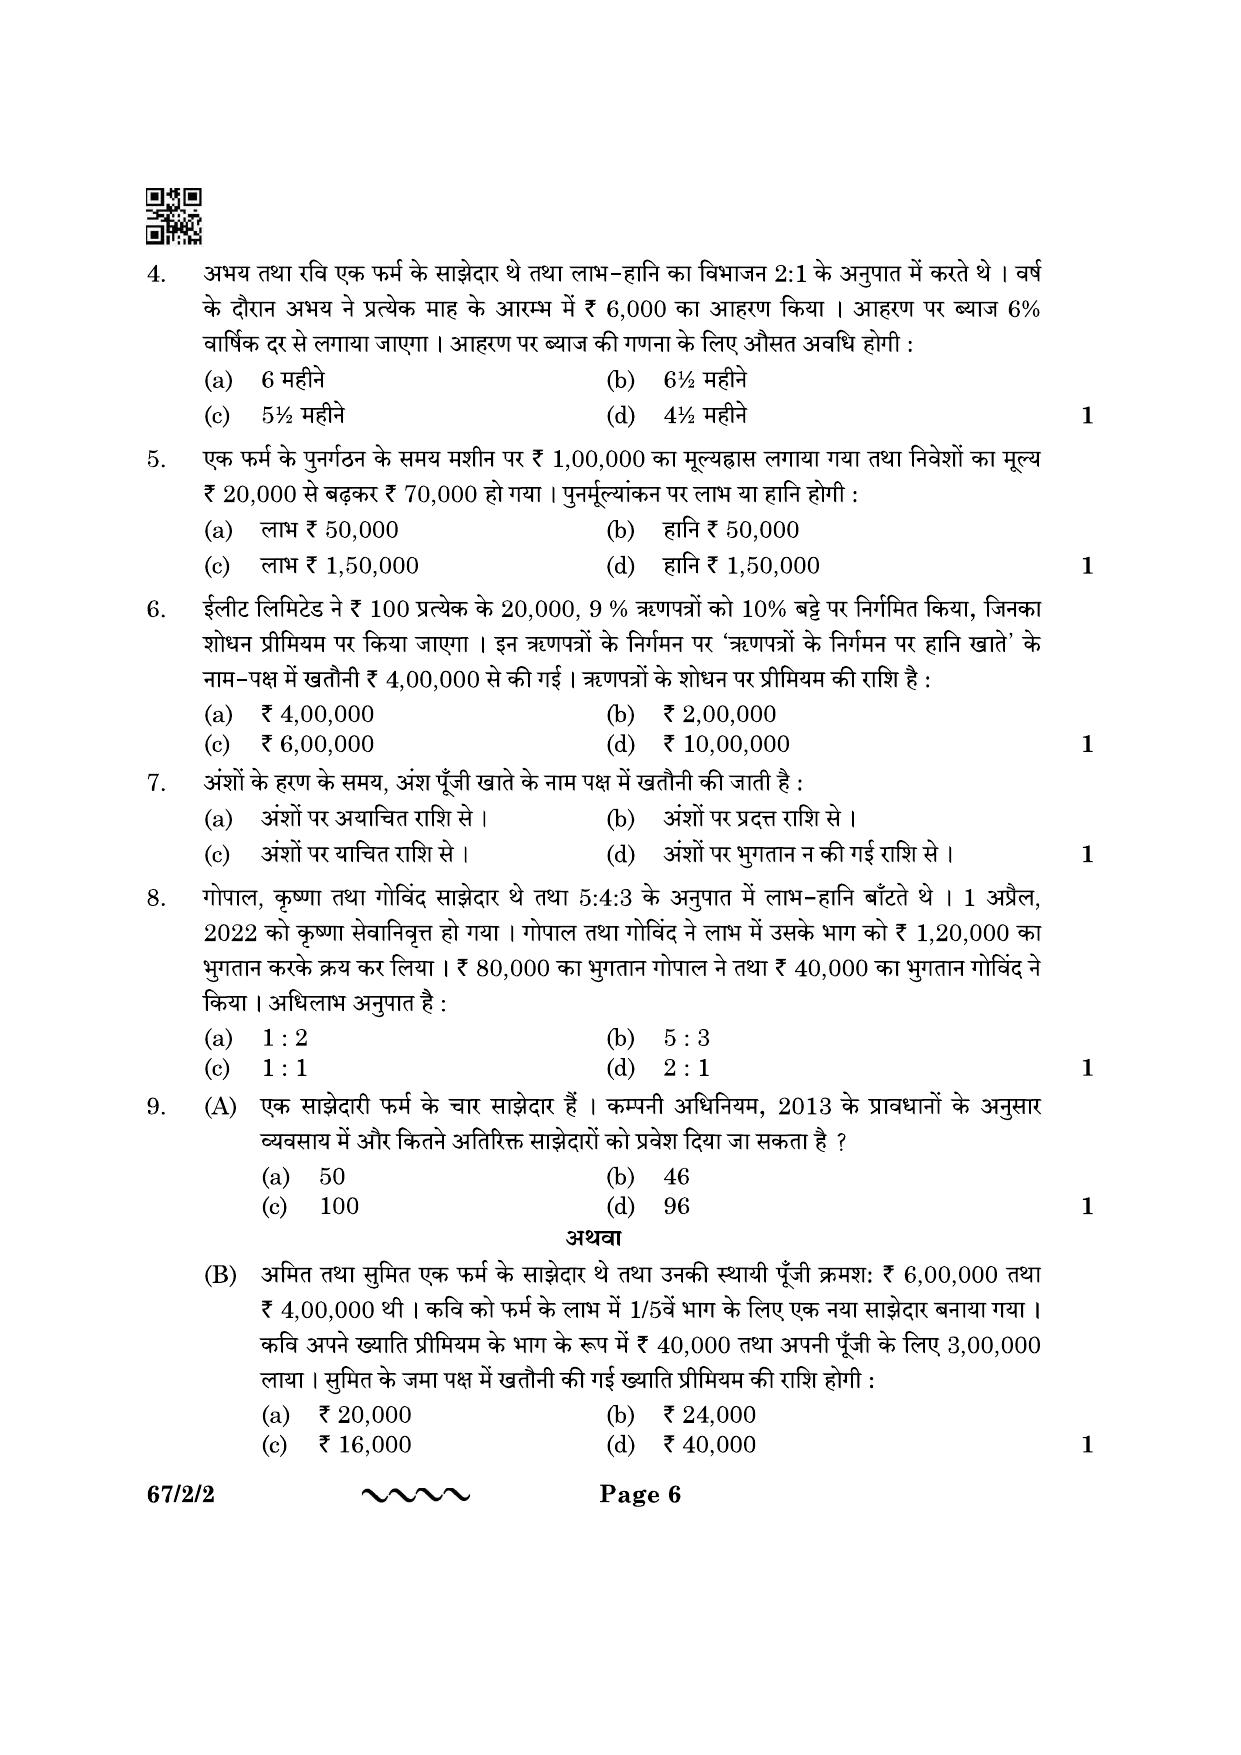 CBSE Class 12 67-2-2 Accountancy 2023 Question Paper - Page 6